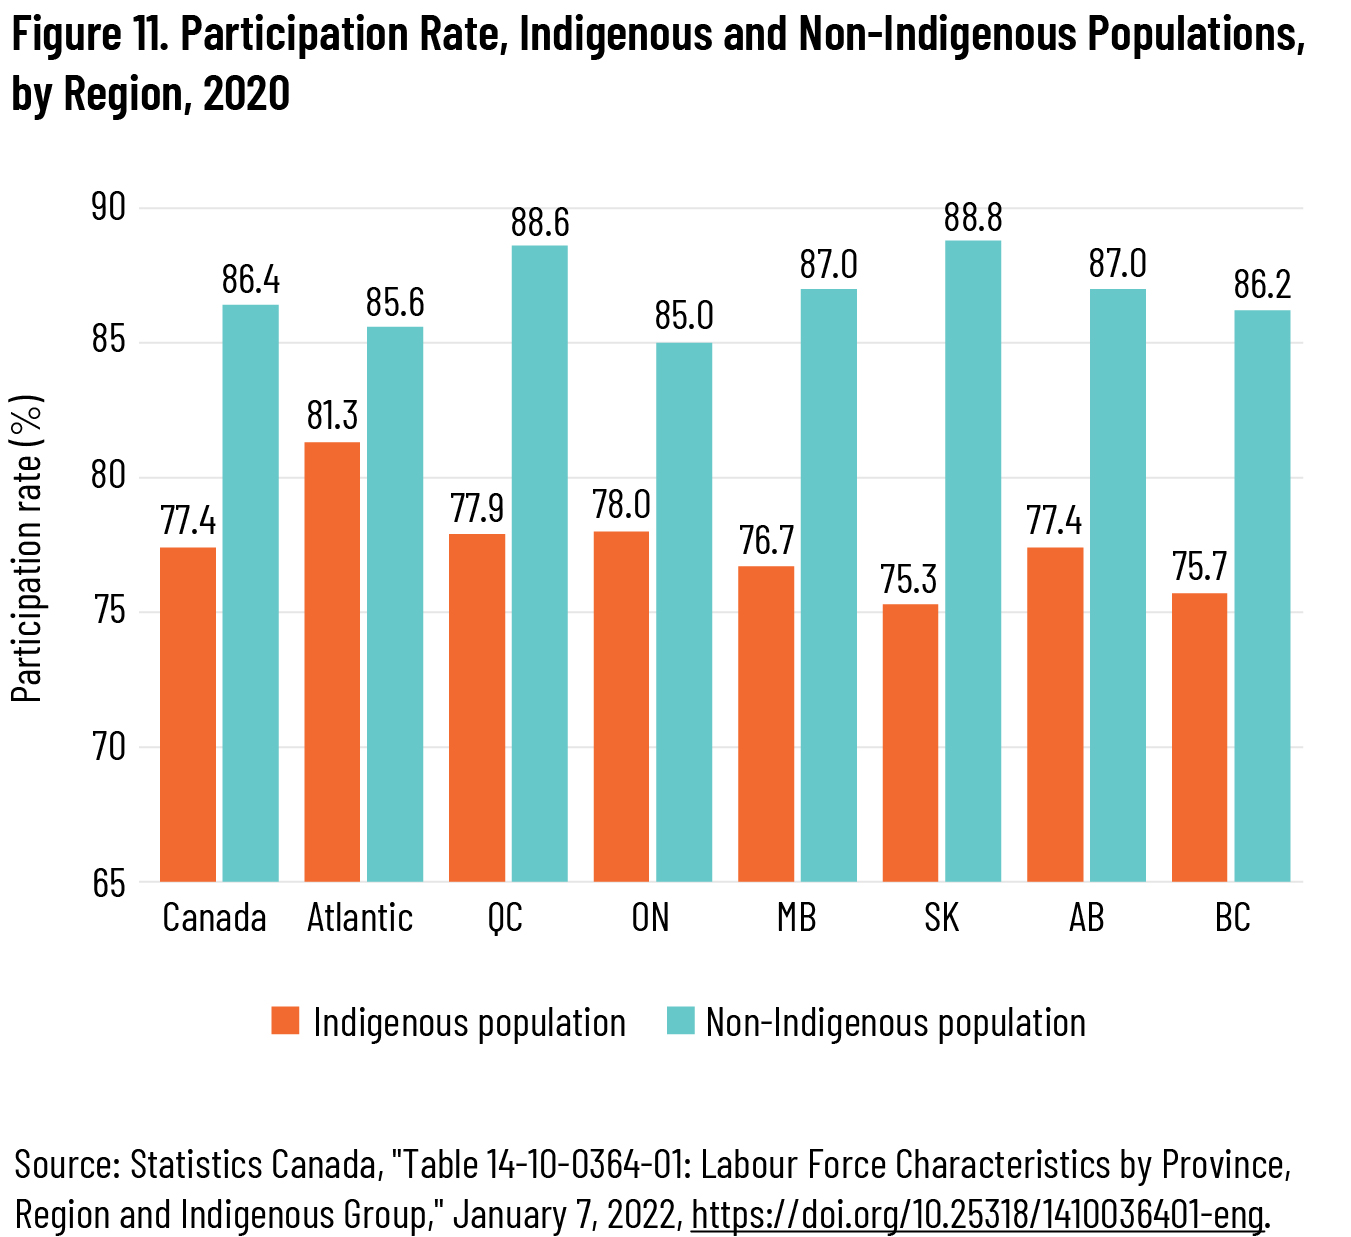 Figure 11. Participation Rate, Indigenous and Non-Indigenous Populations, by Region, 2020